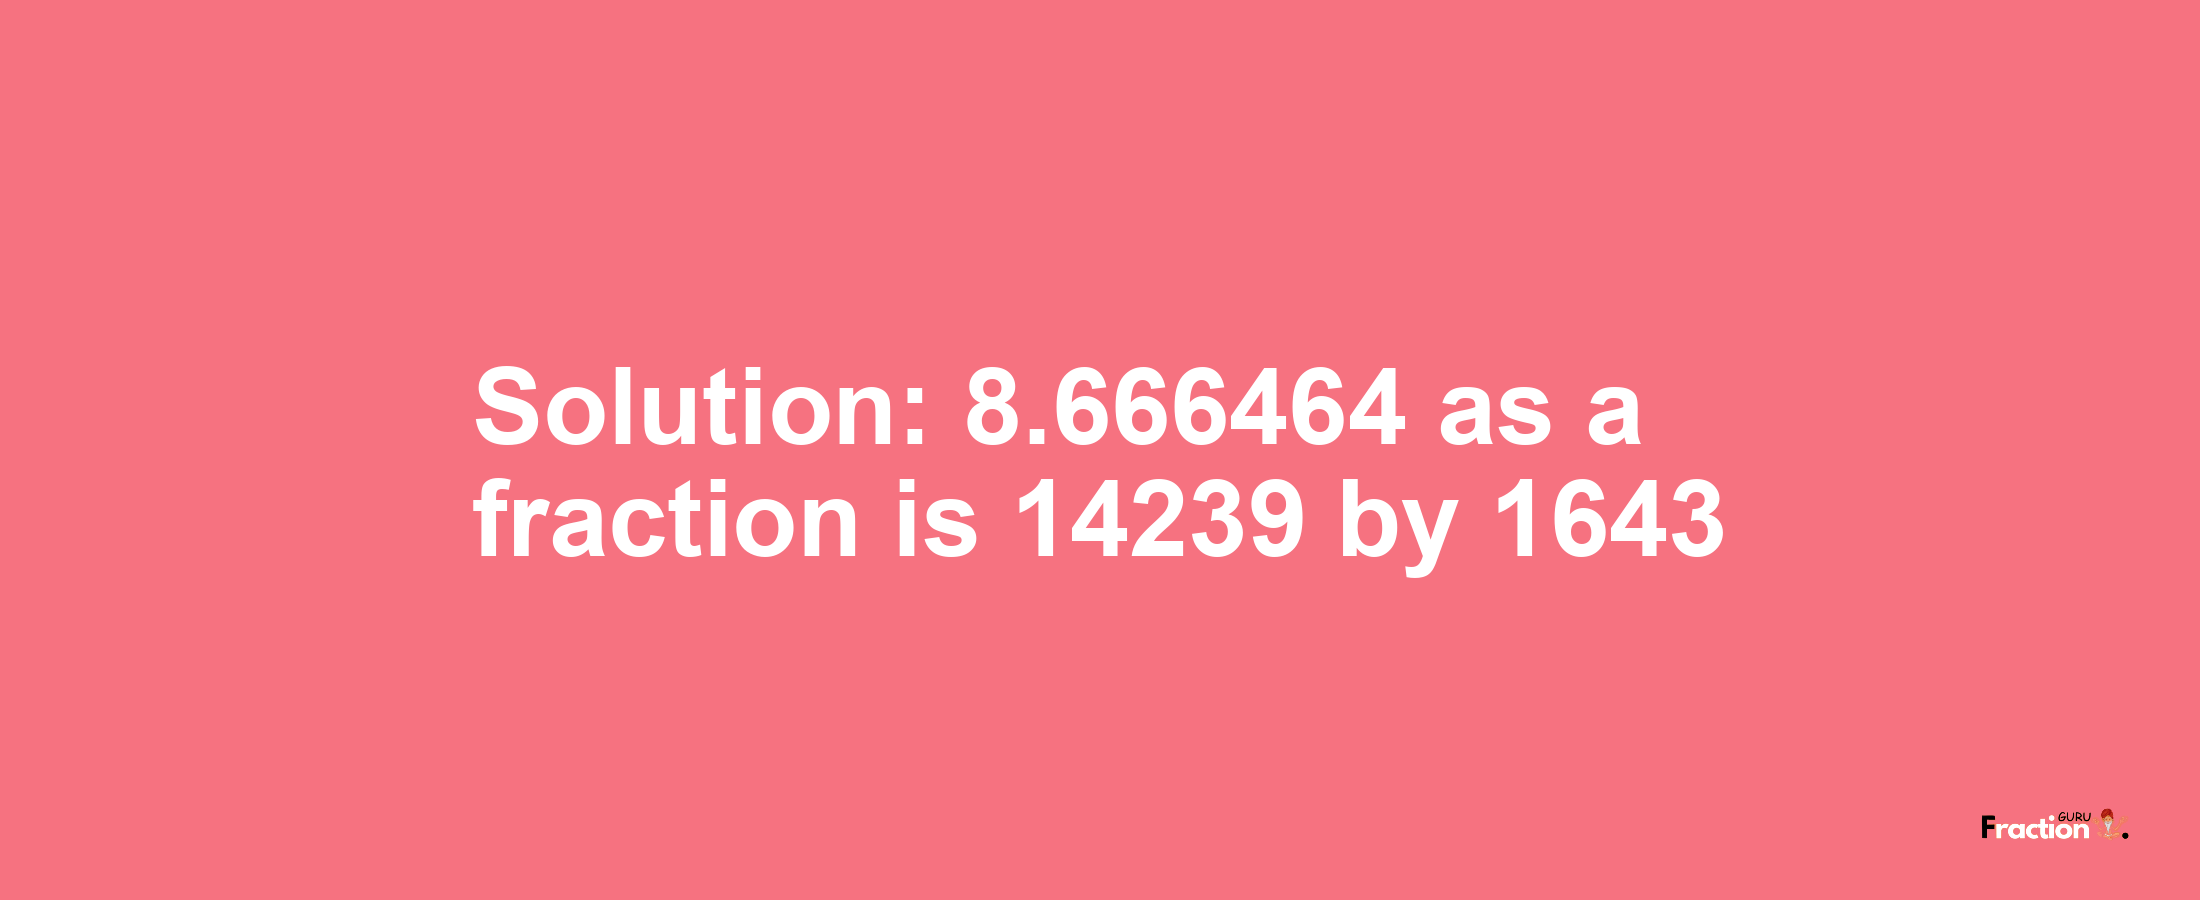 Solution:8.666464 as a fraction is 14239/1643